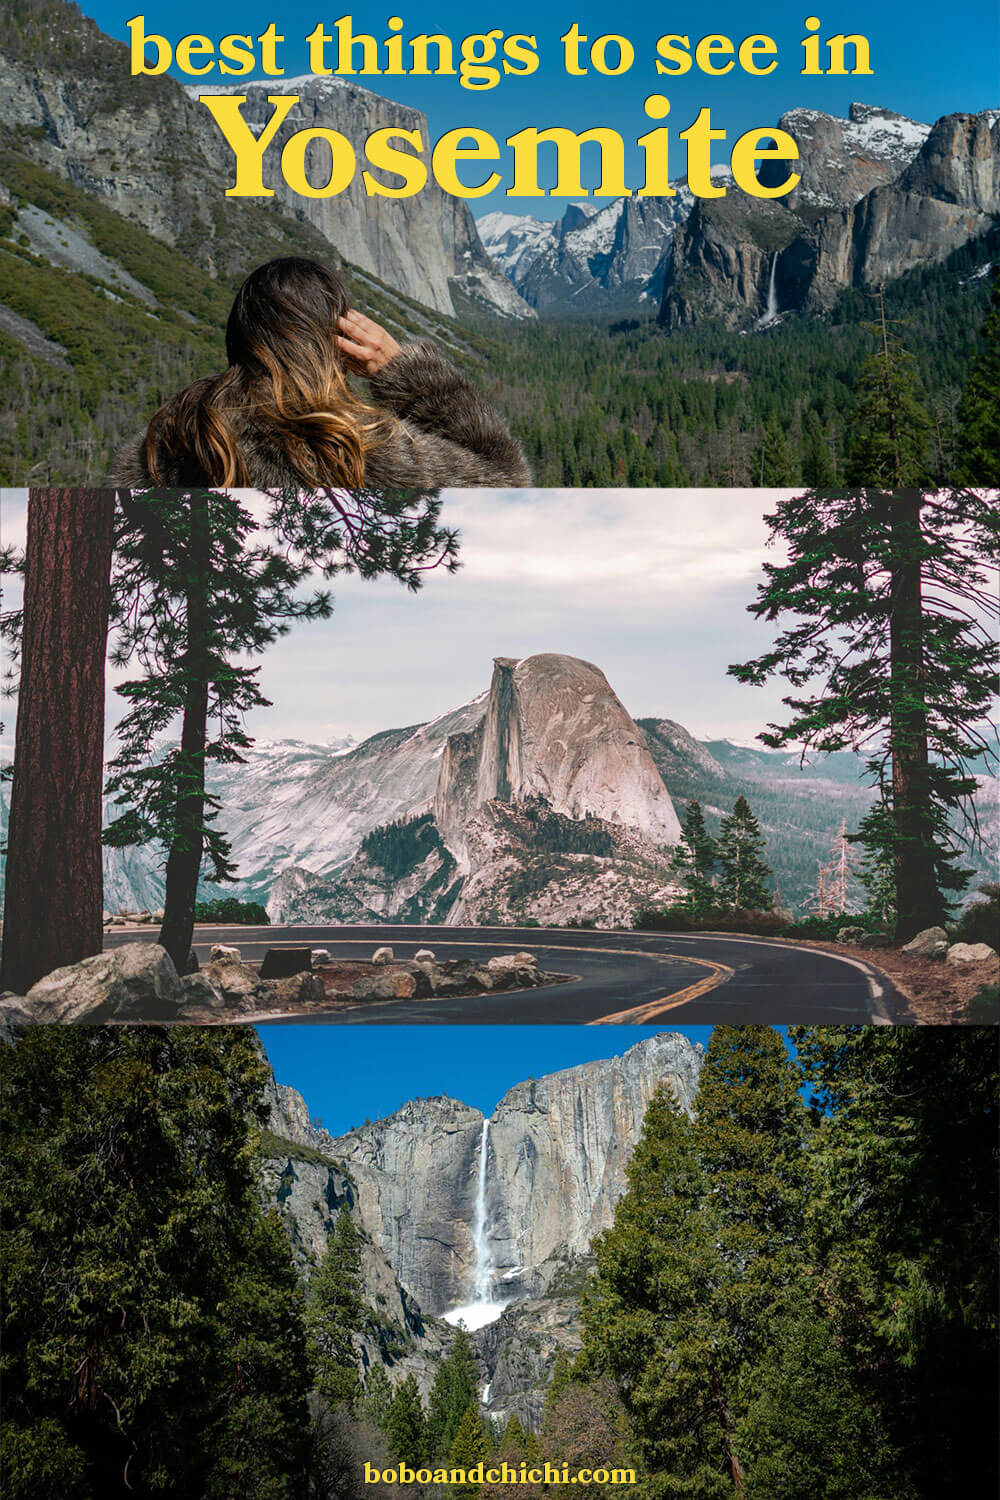 places-to-see-in-yosemite-national-park